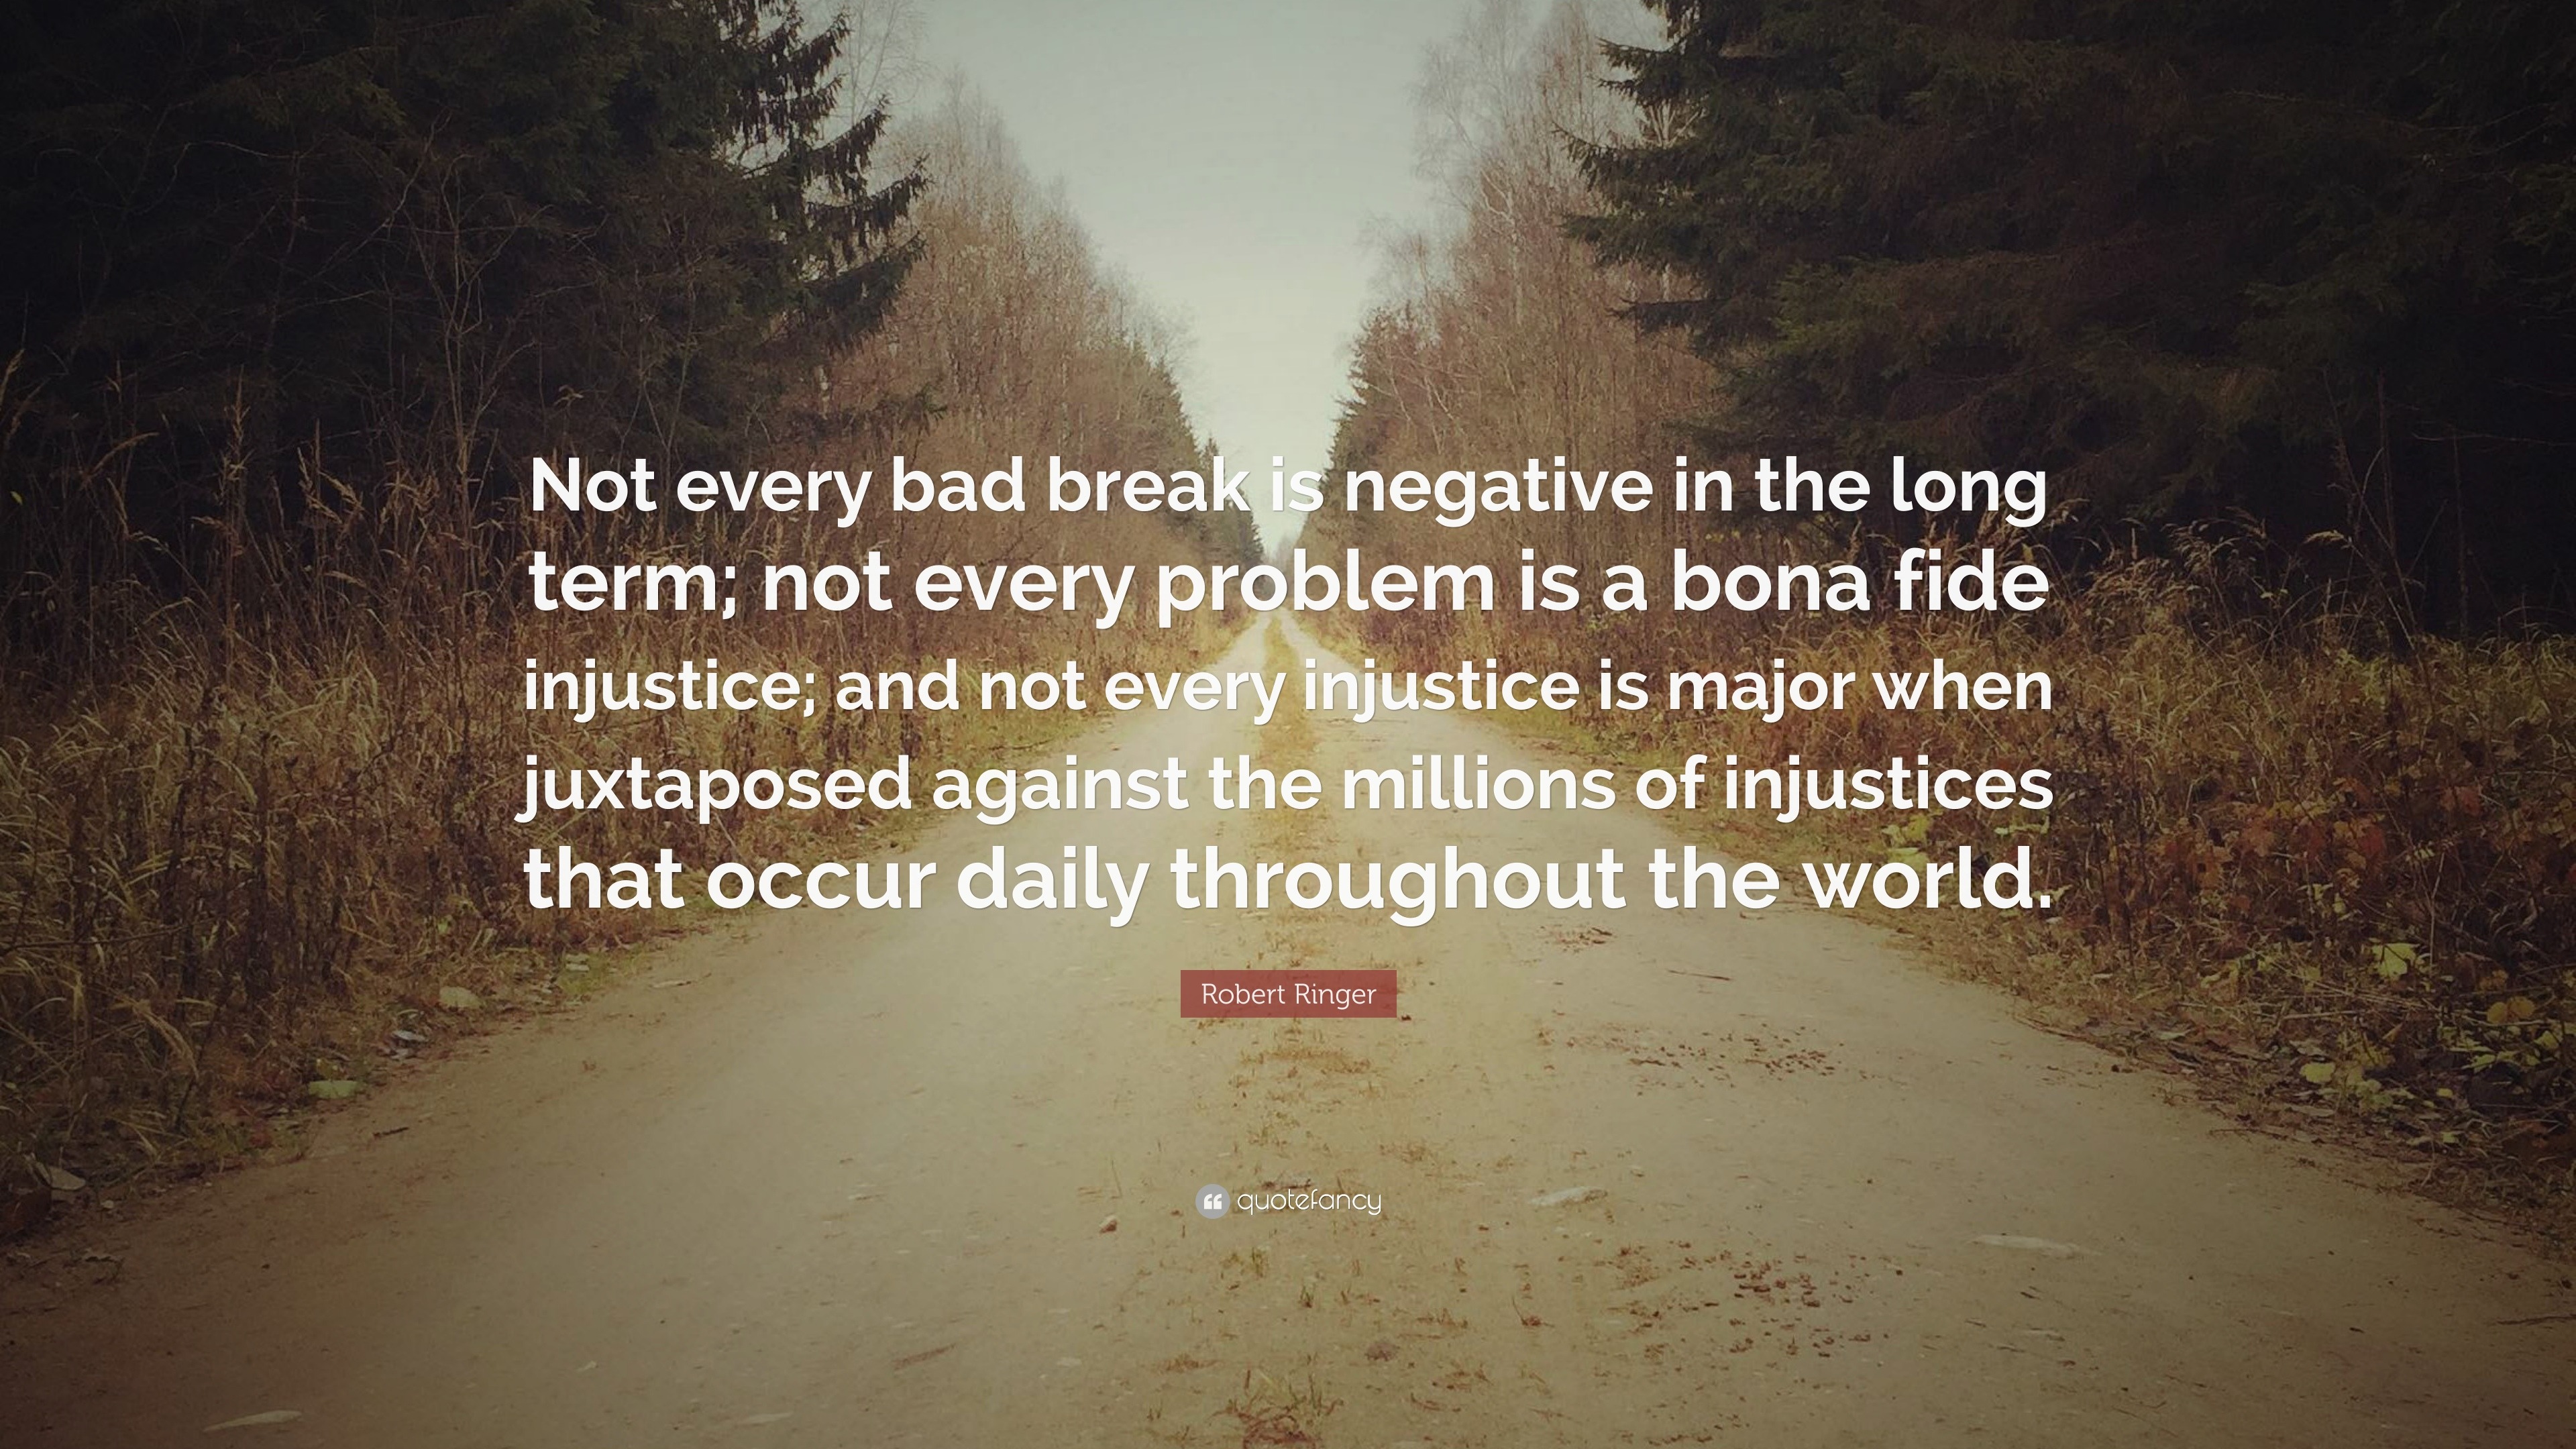 Robert Ringer Quote: “Not every bad break is negative in the long term ...